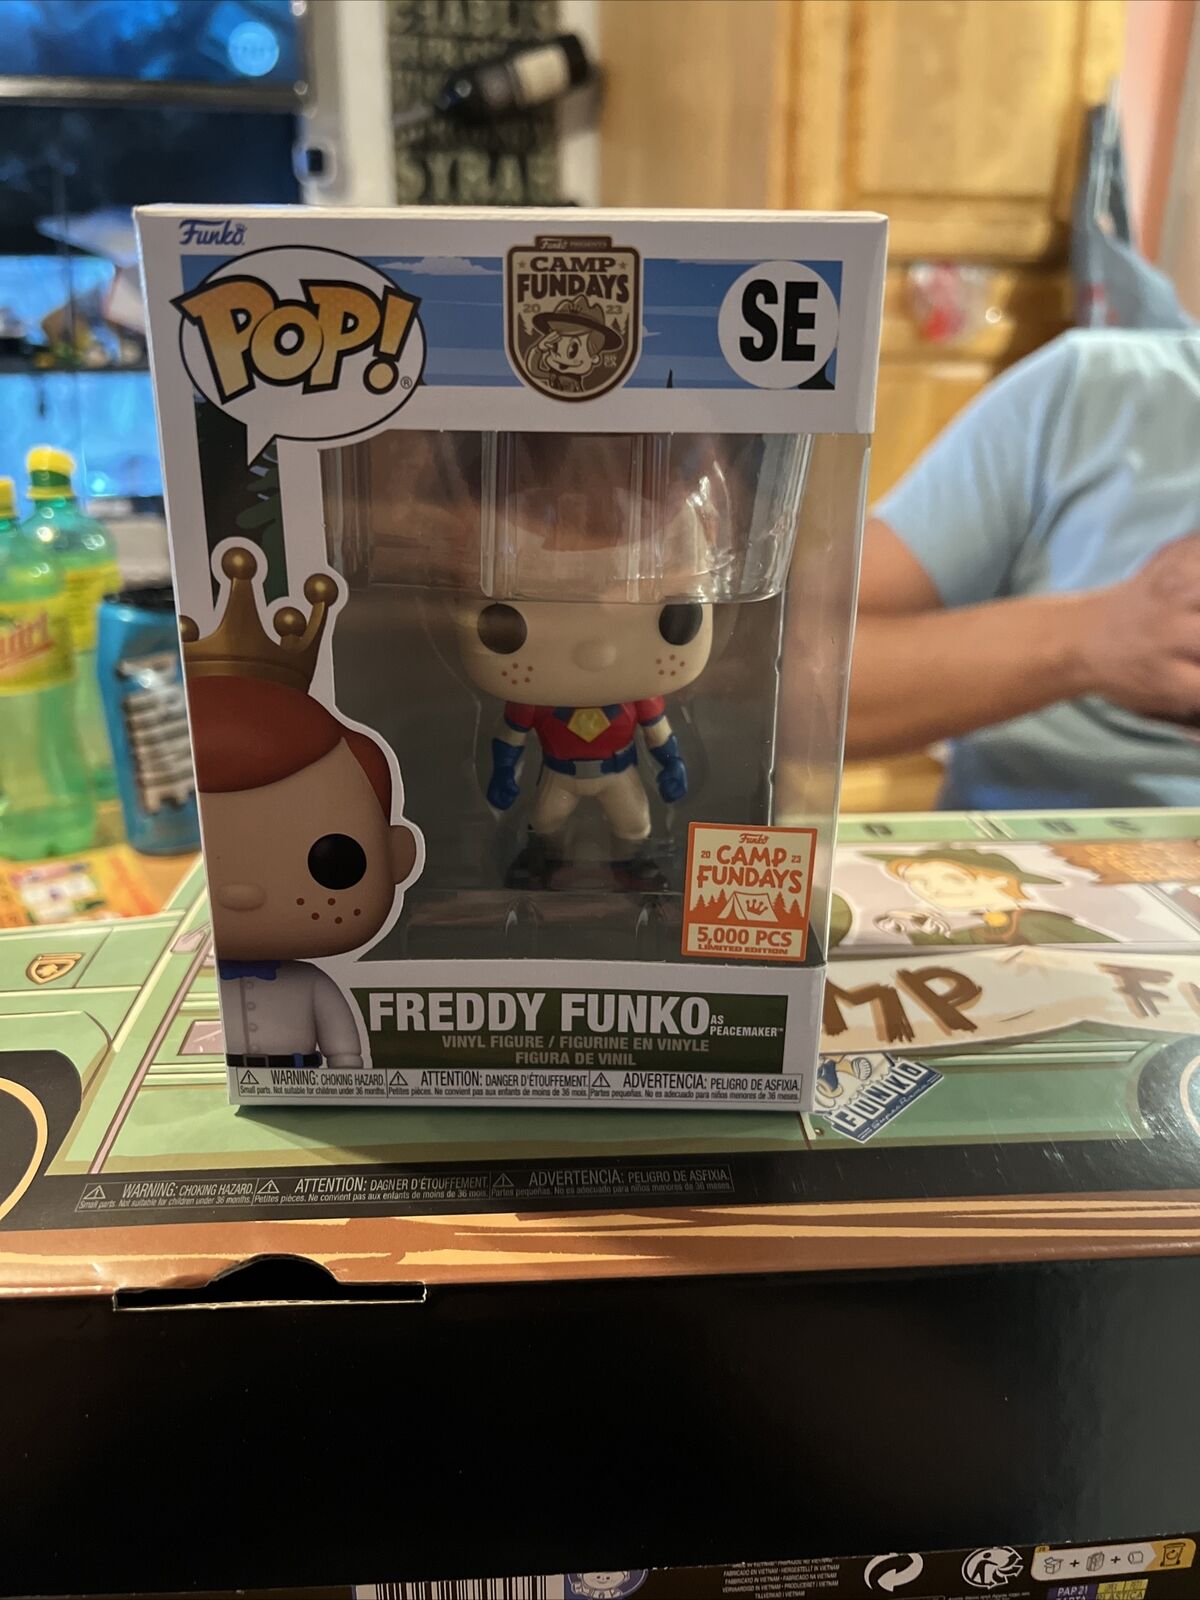 FUNKO POP CAMP FUNDAYS SE THE SUICIDE SQUAD FREDDY FUNKO AS PEACEMAKER 1/5000